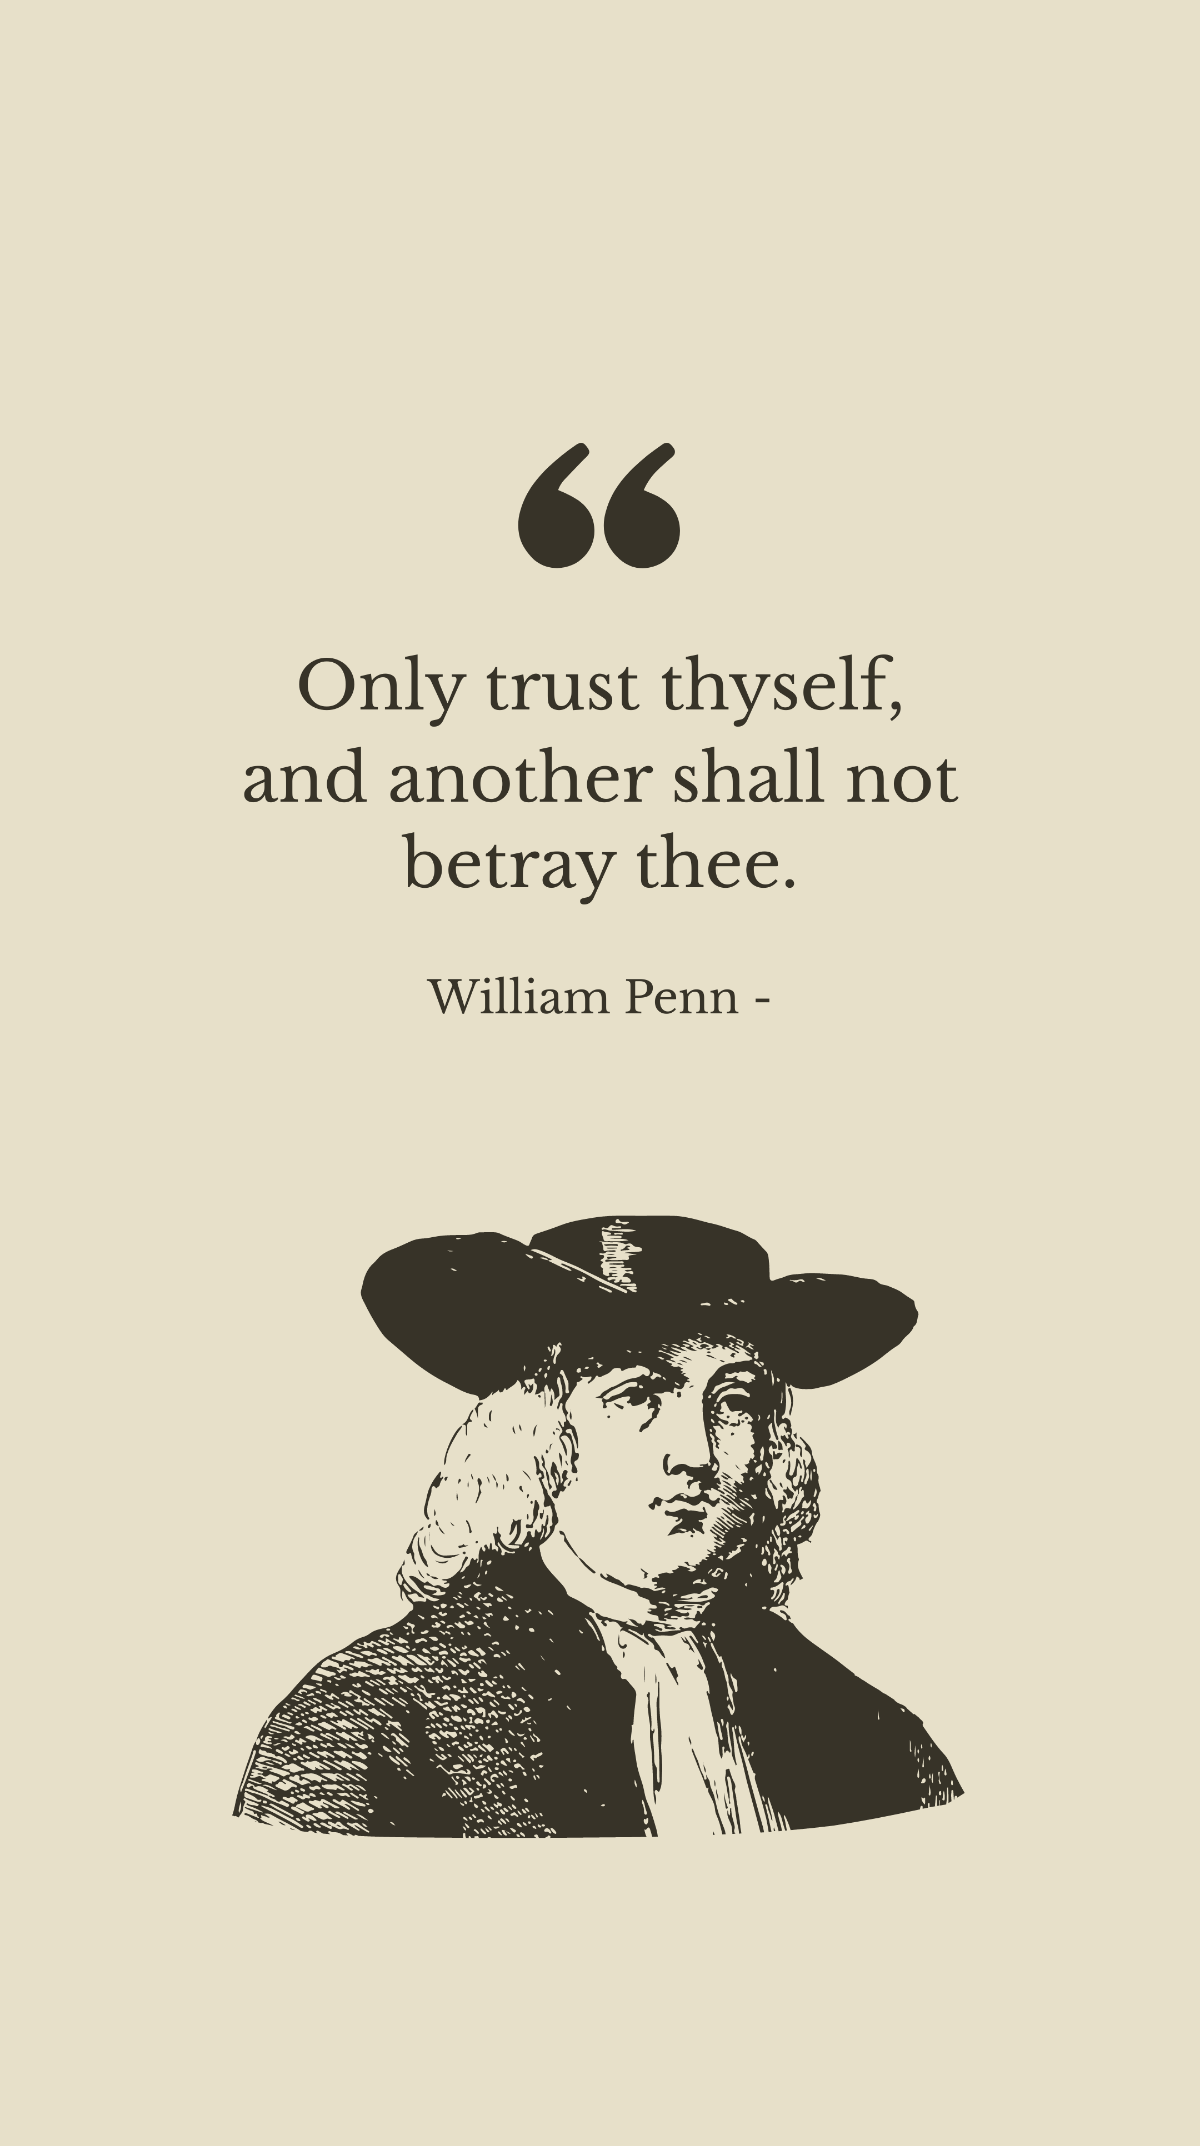 Free William Penn - Only trust thyself, and another shall not betray thee. Template